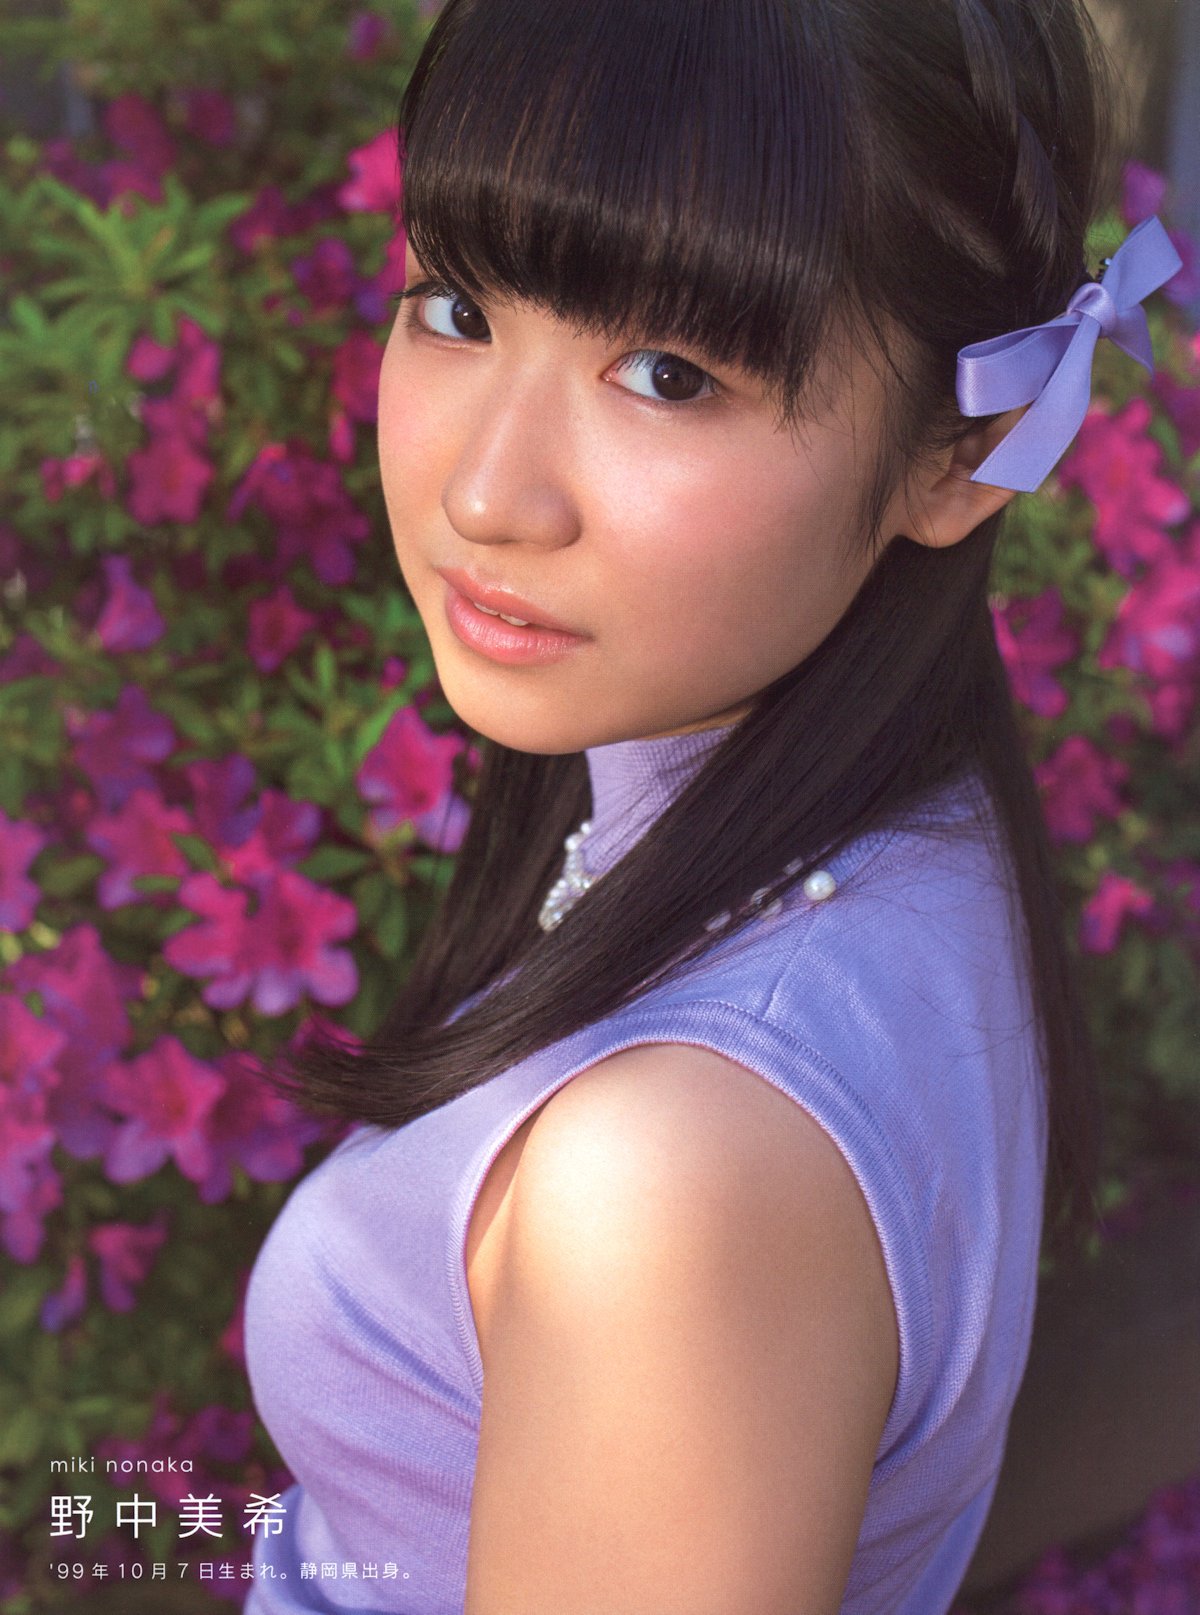 http://vignette4.wikia.nocookie.net/helloproject/images/b/b7/Nonaka_Miki-558297.jpg/revision/latest?cb=20150625174314